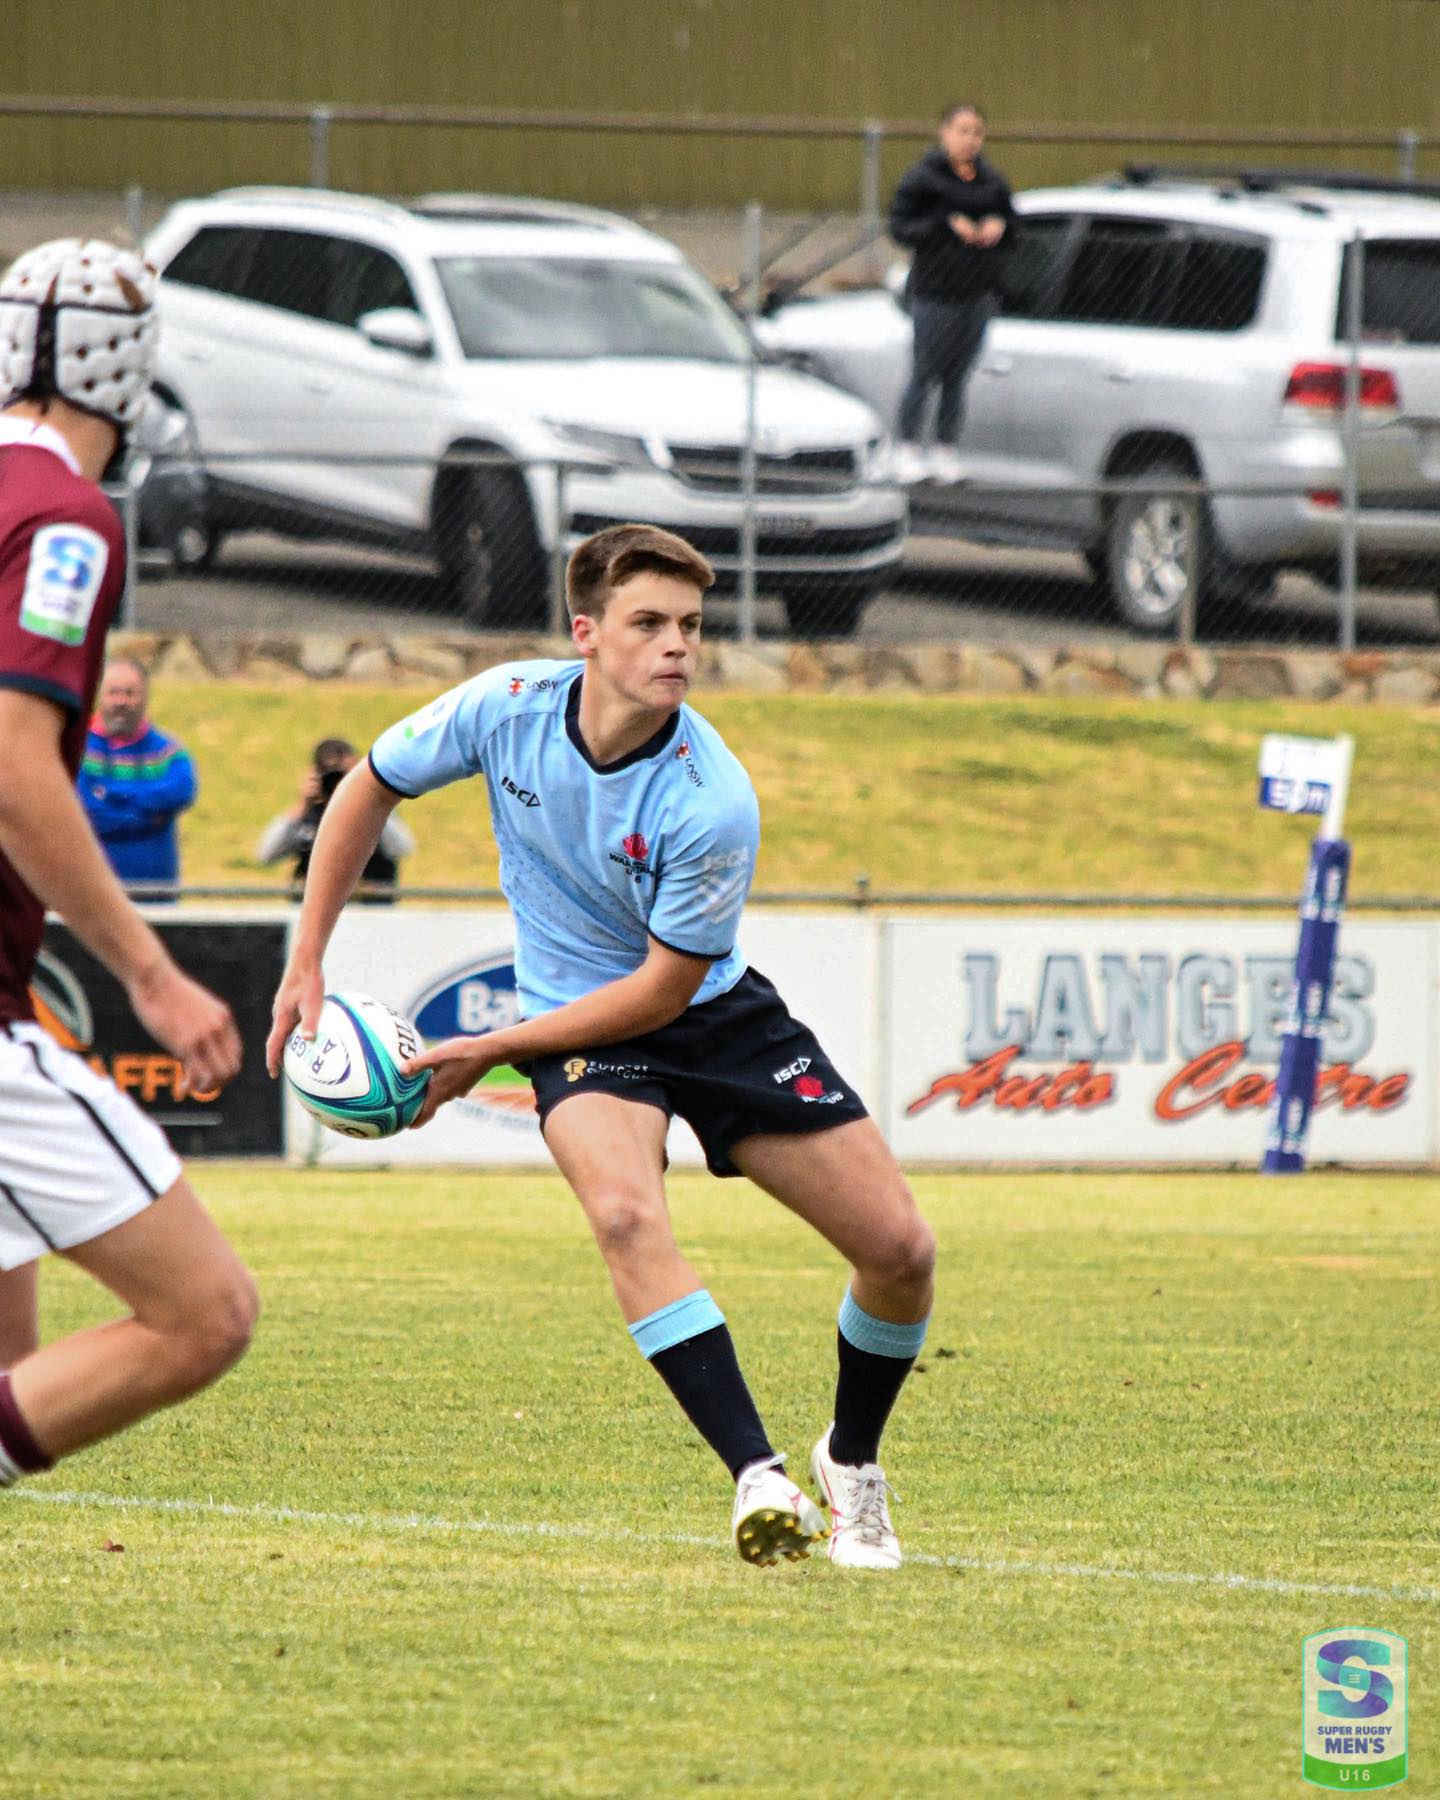 National selection for Narrabri brothers Jonty and Joey Fowler